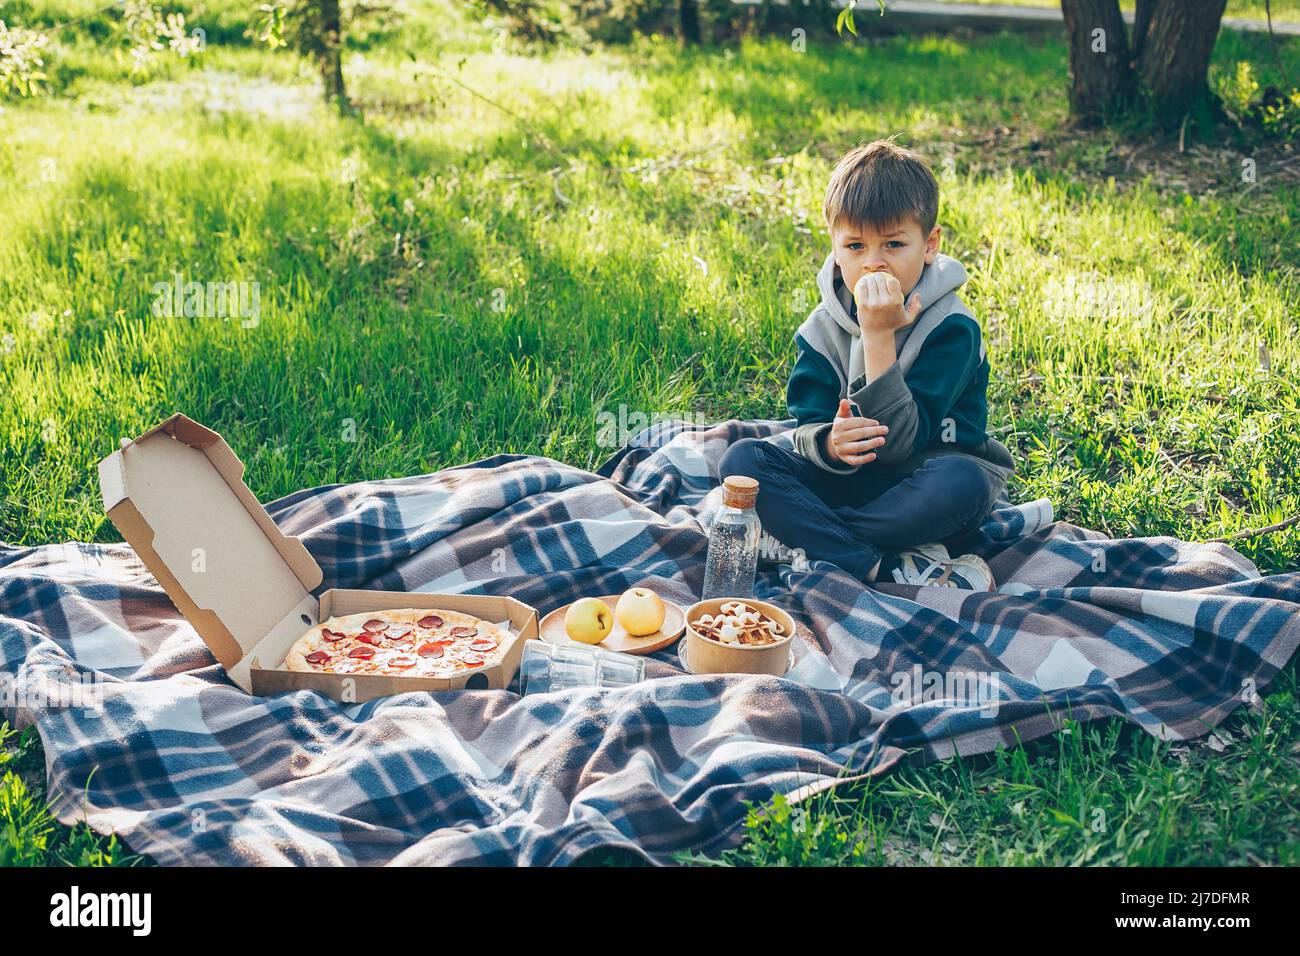 Boy 7-8 years old sitting on plaid and eating apple. Concept of spring or summer picnic Stock Photo